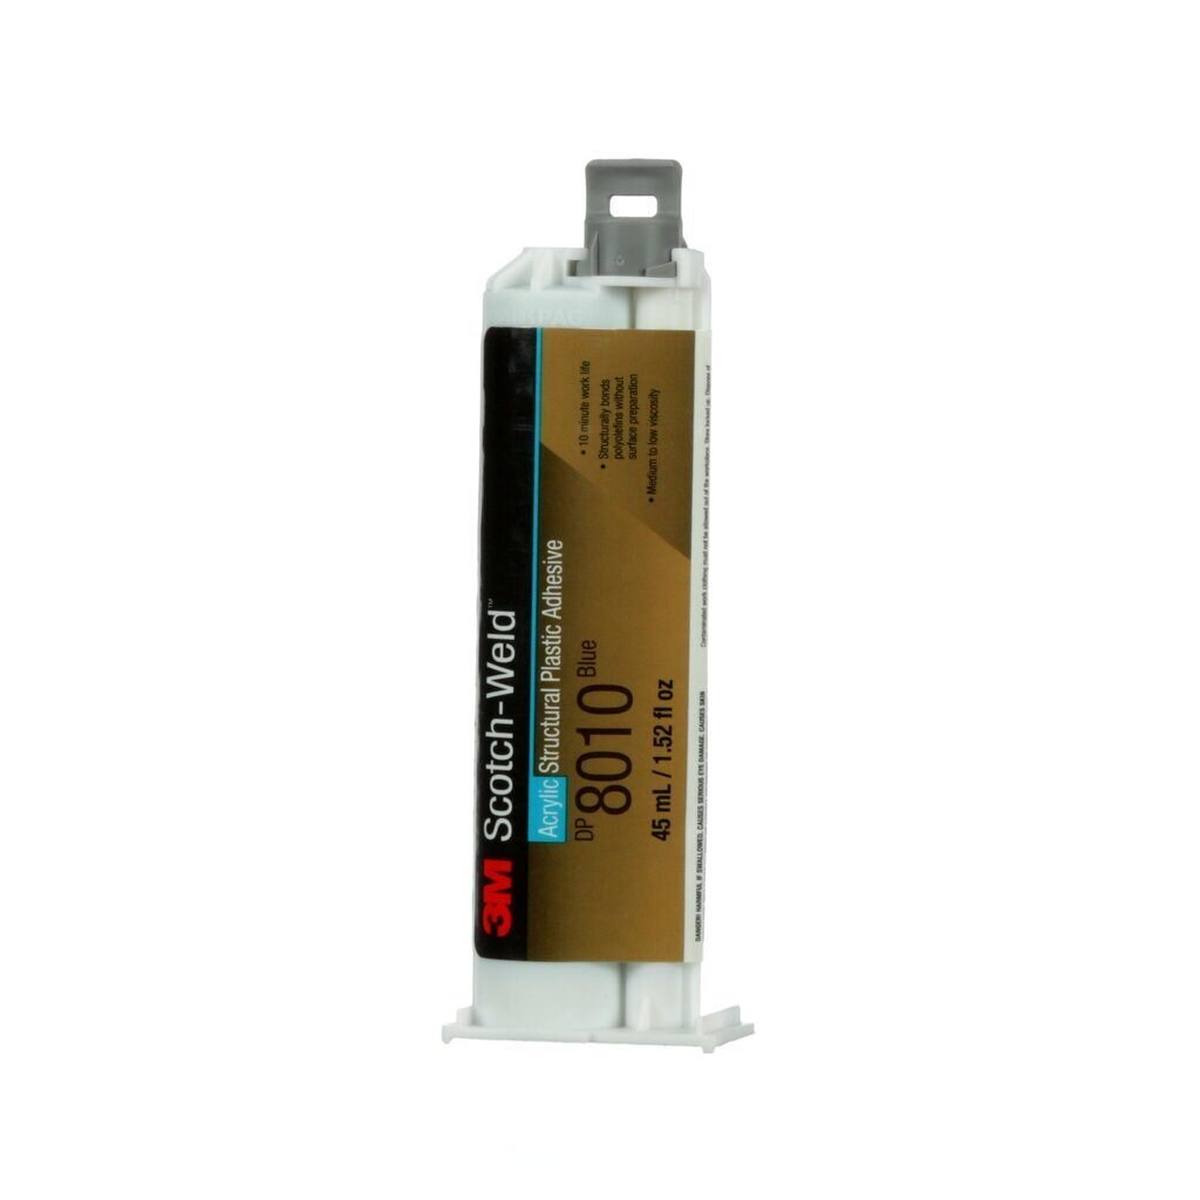 3M Scotch-Weld 2-component acrylic-based construction adhesive for the EPX System DP 8010, blue-green, 45 ml